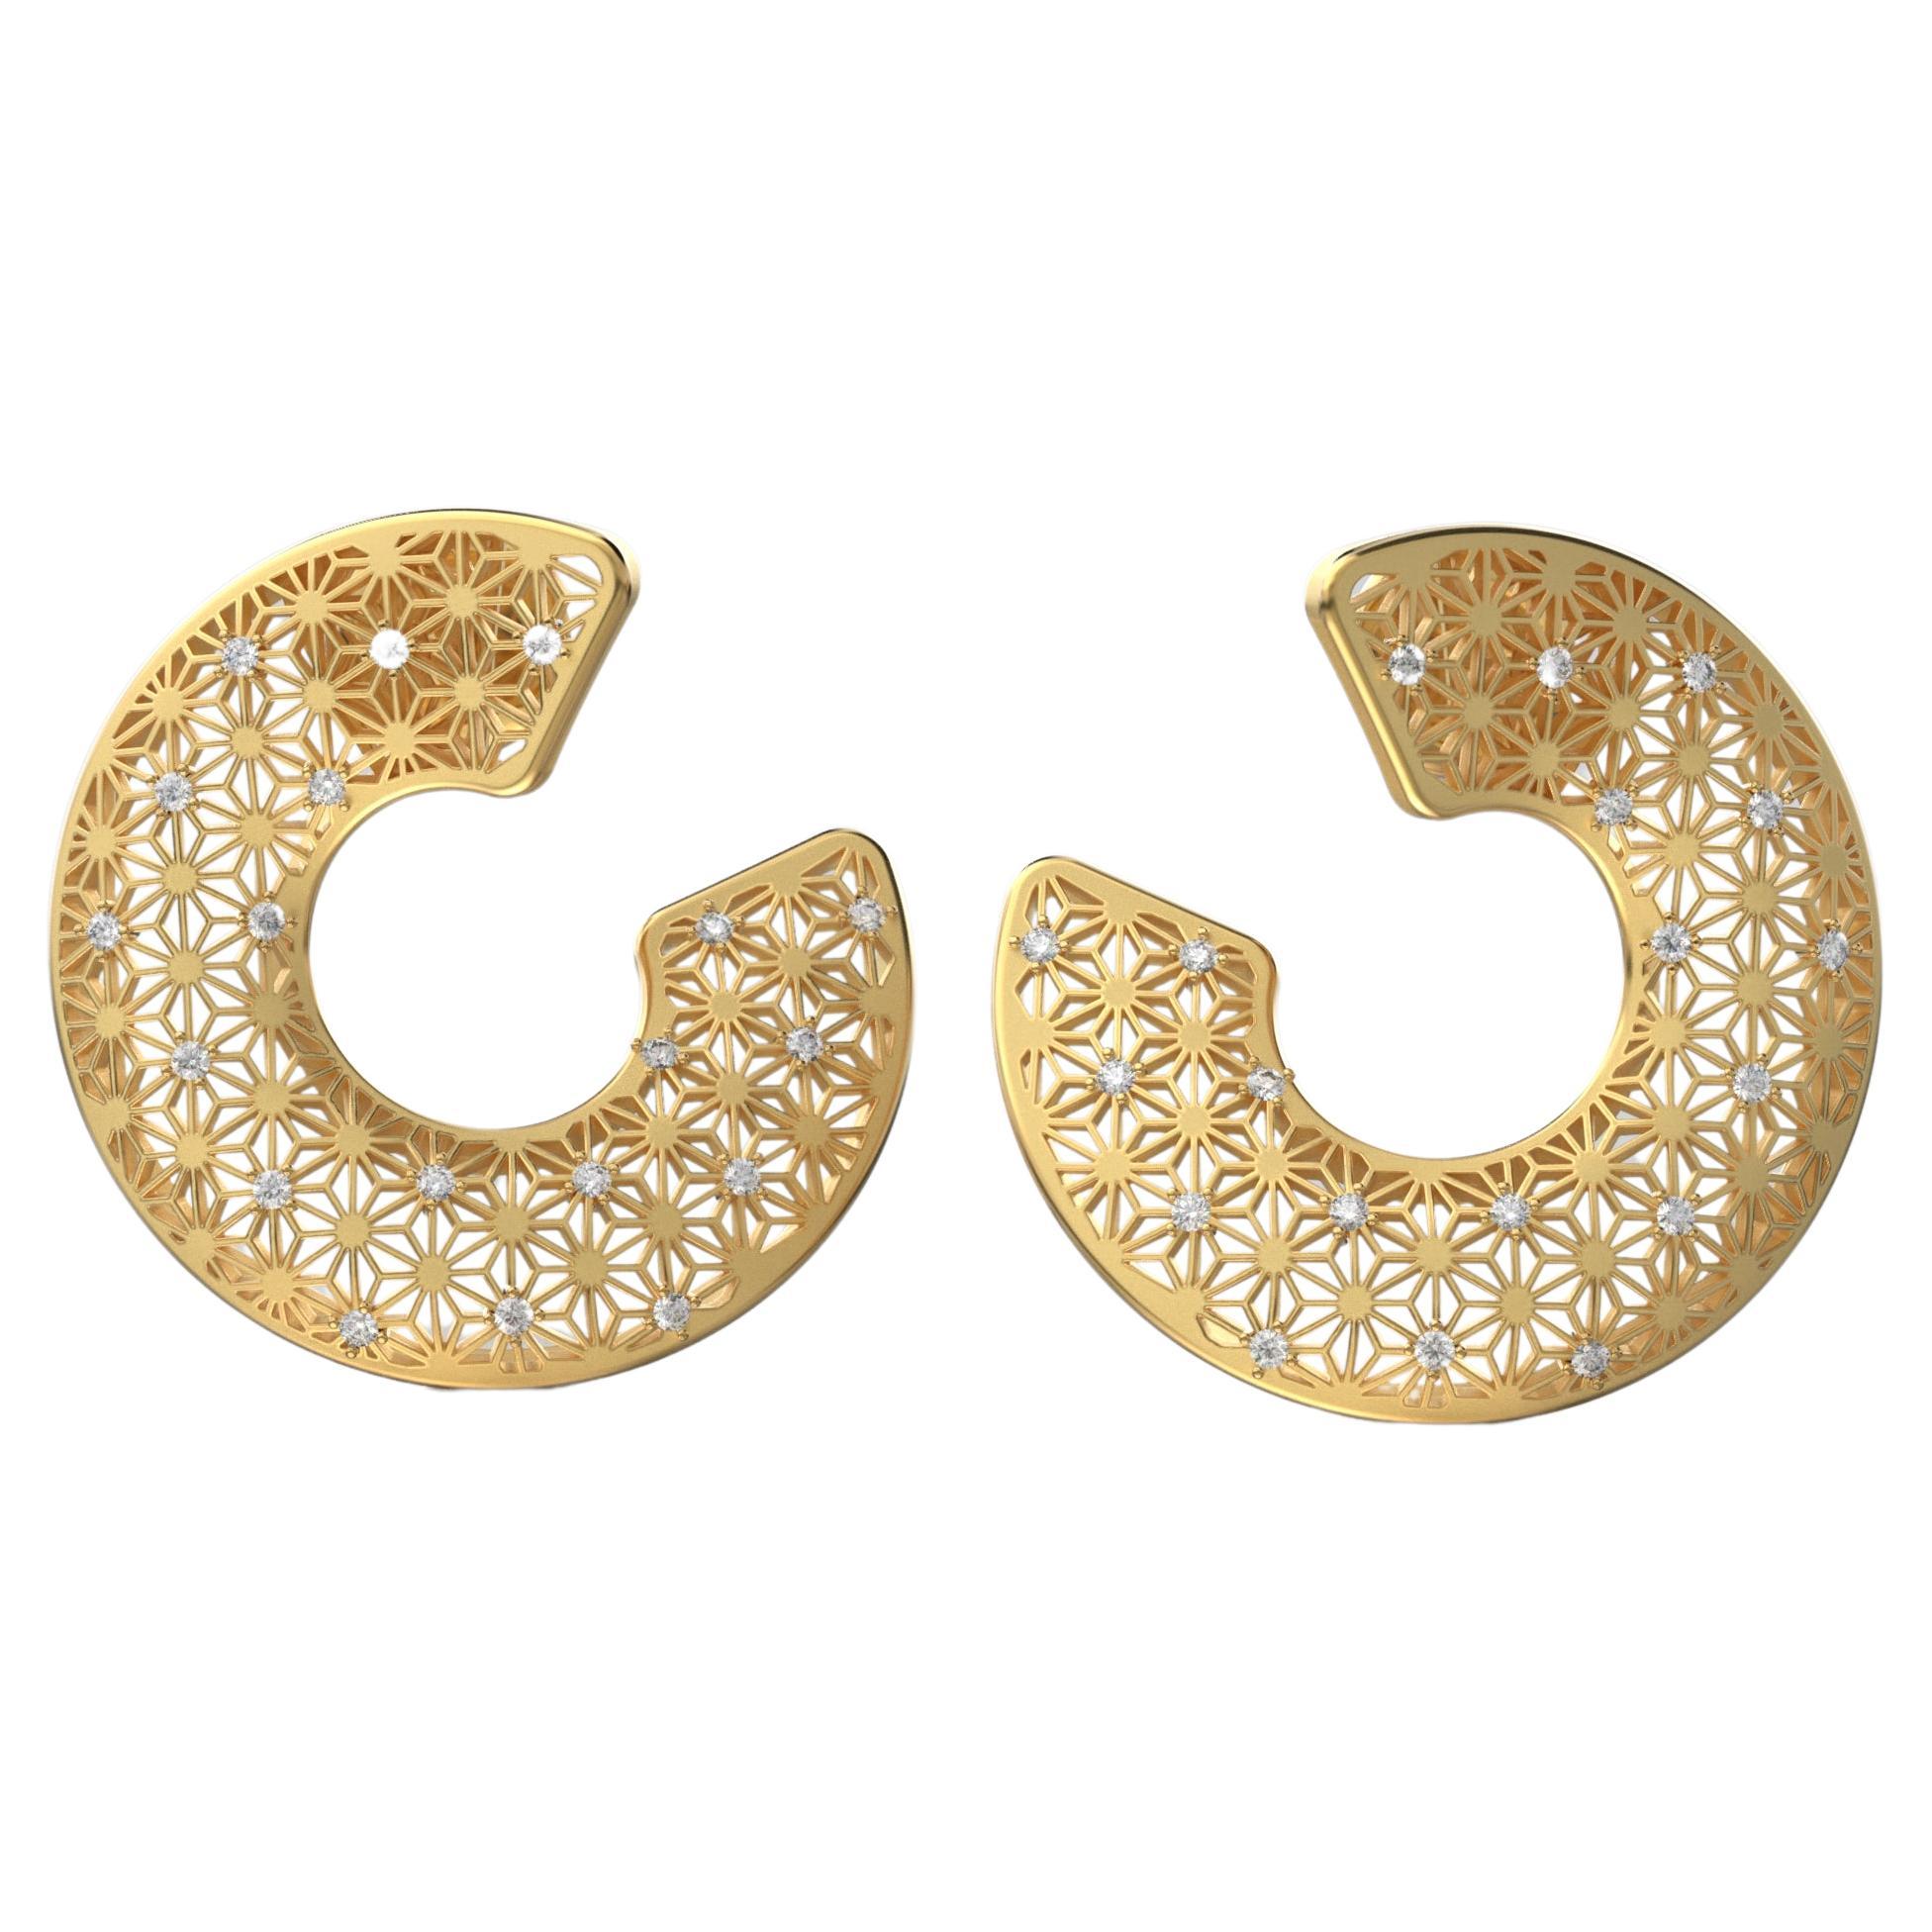 Made to Order.
Elevate your style with bold sophistication - discover Oltremare Gioielli's statement diamond earrings, meticulously crafted in Italy from 14k gold. Adorned with 0.39 Ct of natural extra white diamonds, these stunning large earrings